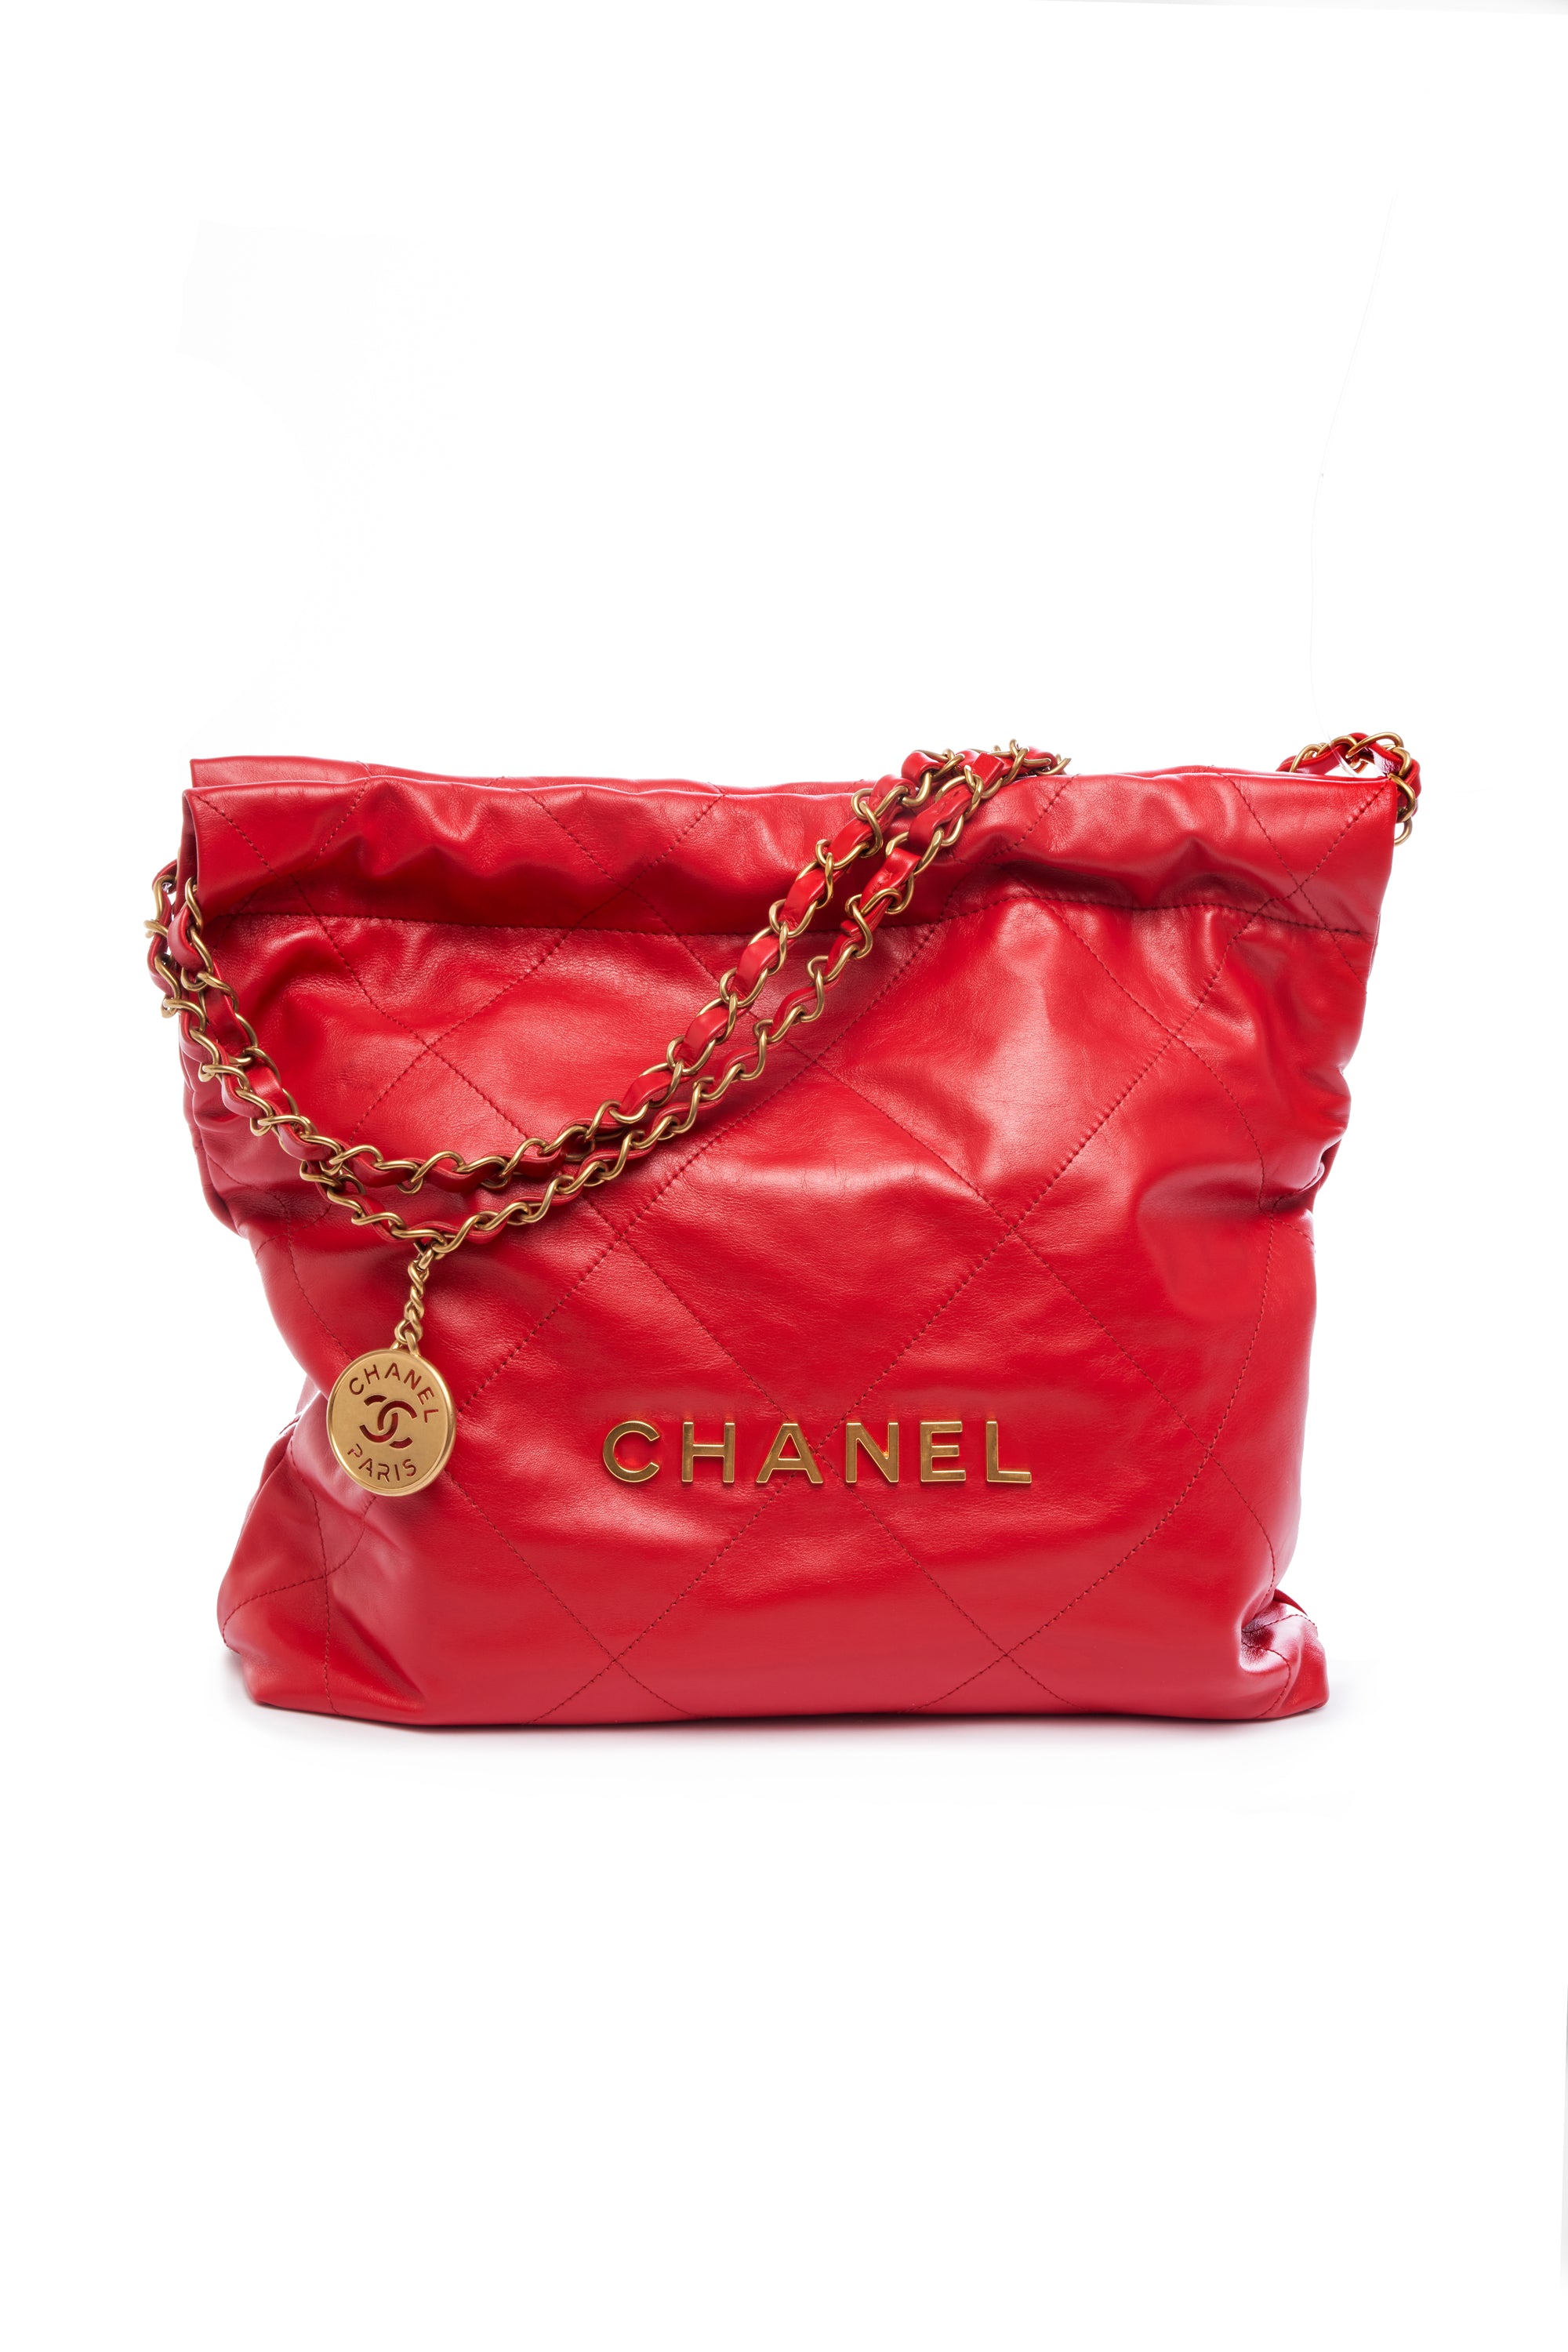 Chanel Candy Red 22 Bag